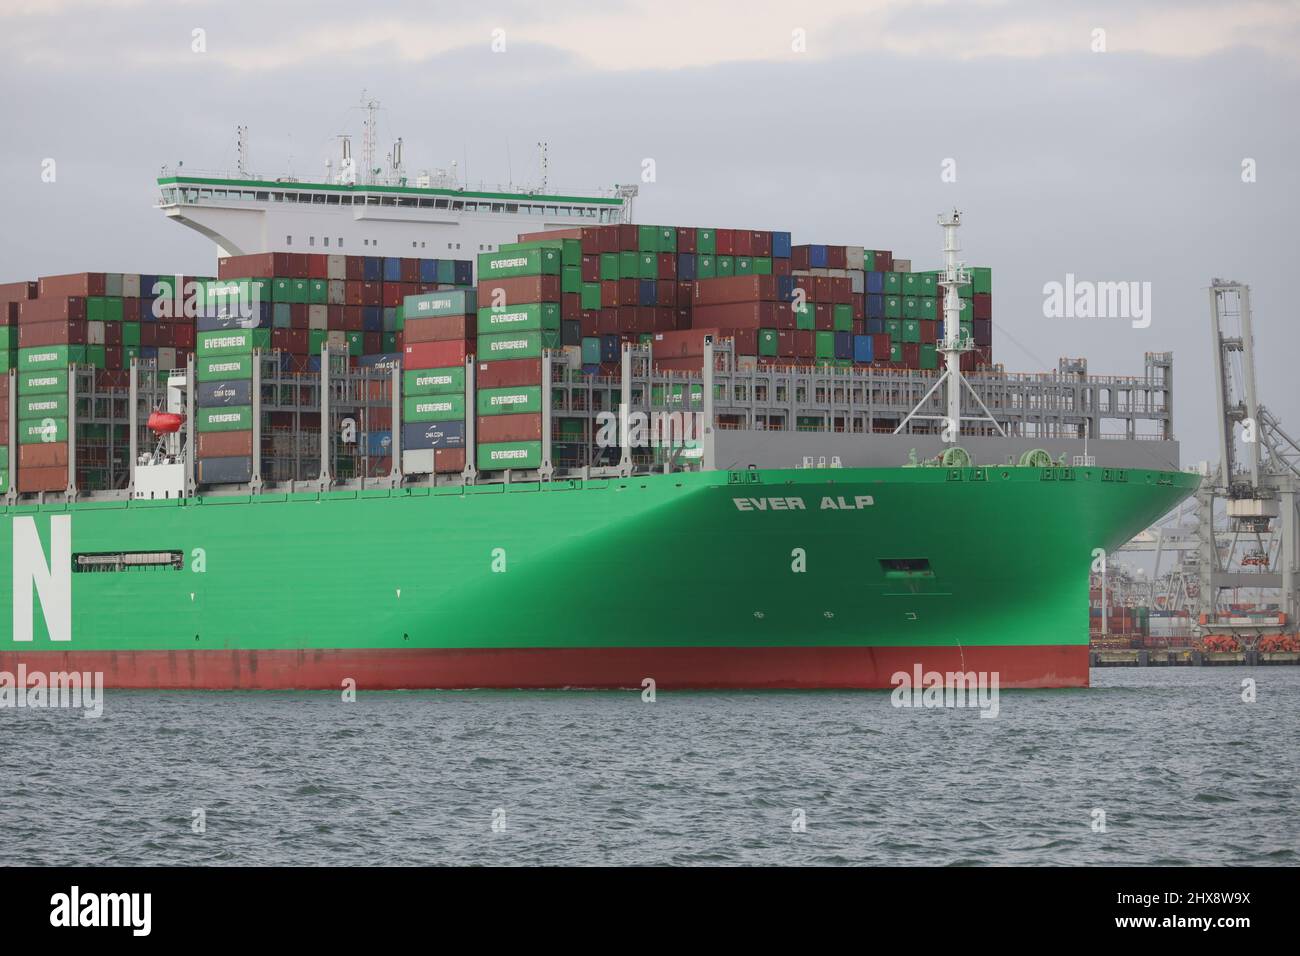 The container ship Ever Alp leaves the port of Rotterdam on January 30, 2022. Stock Photo